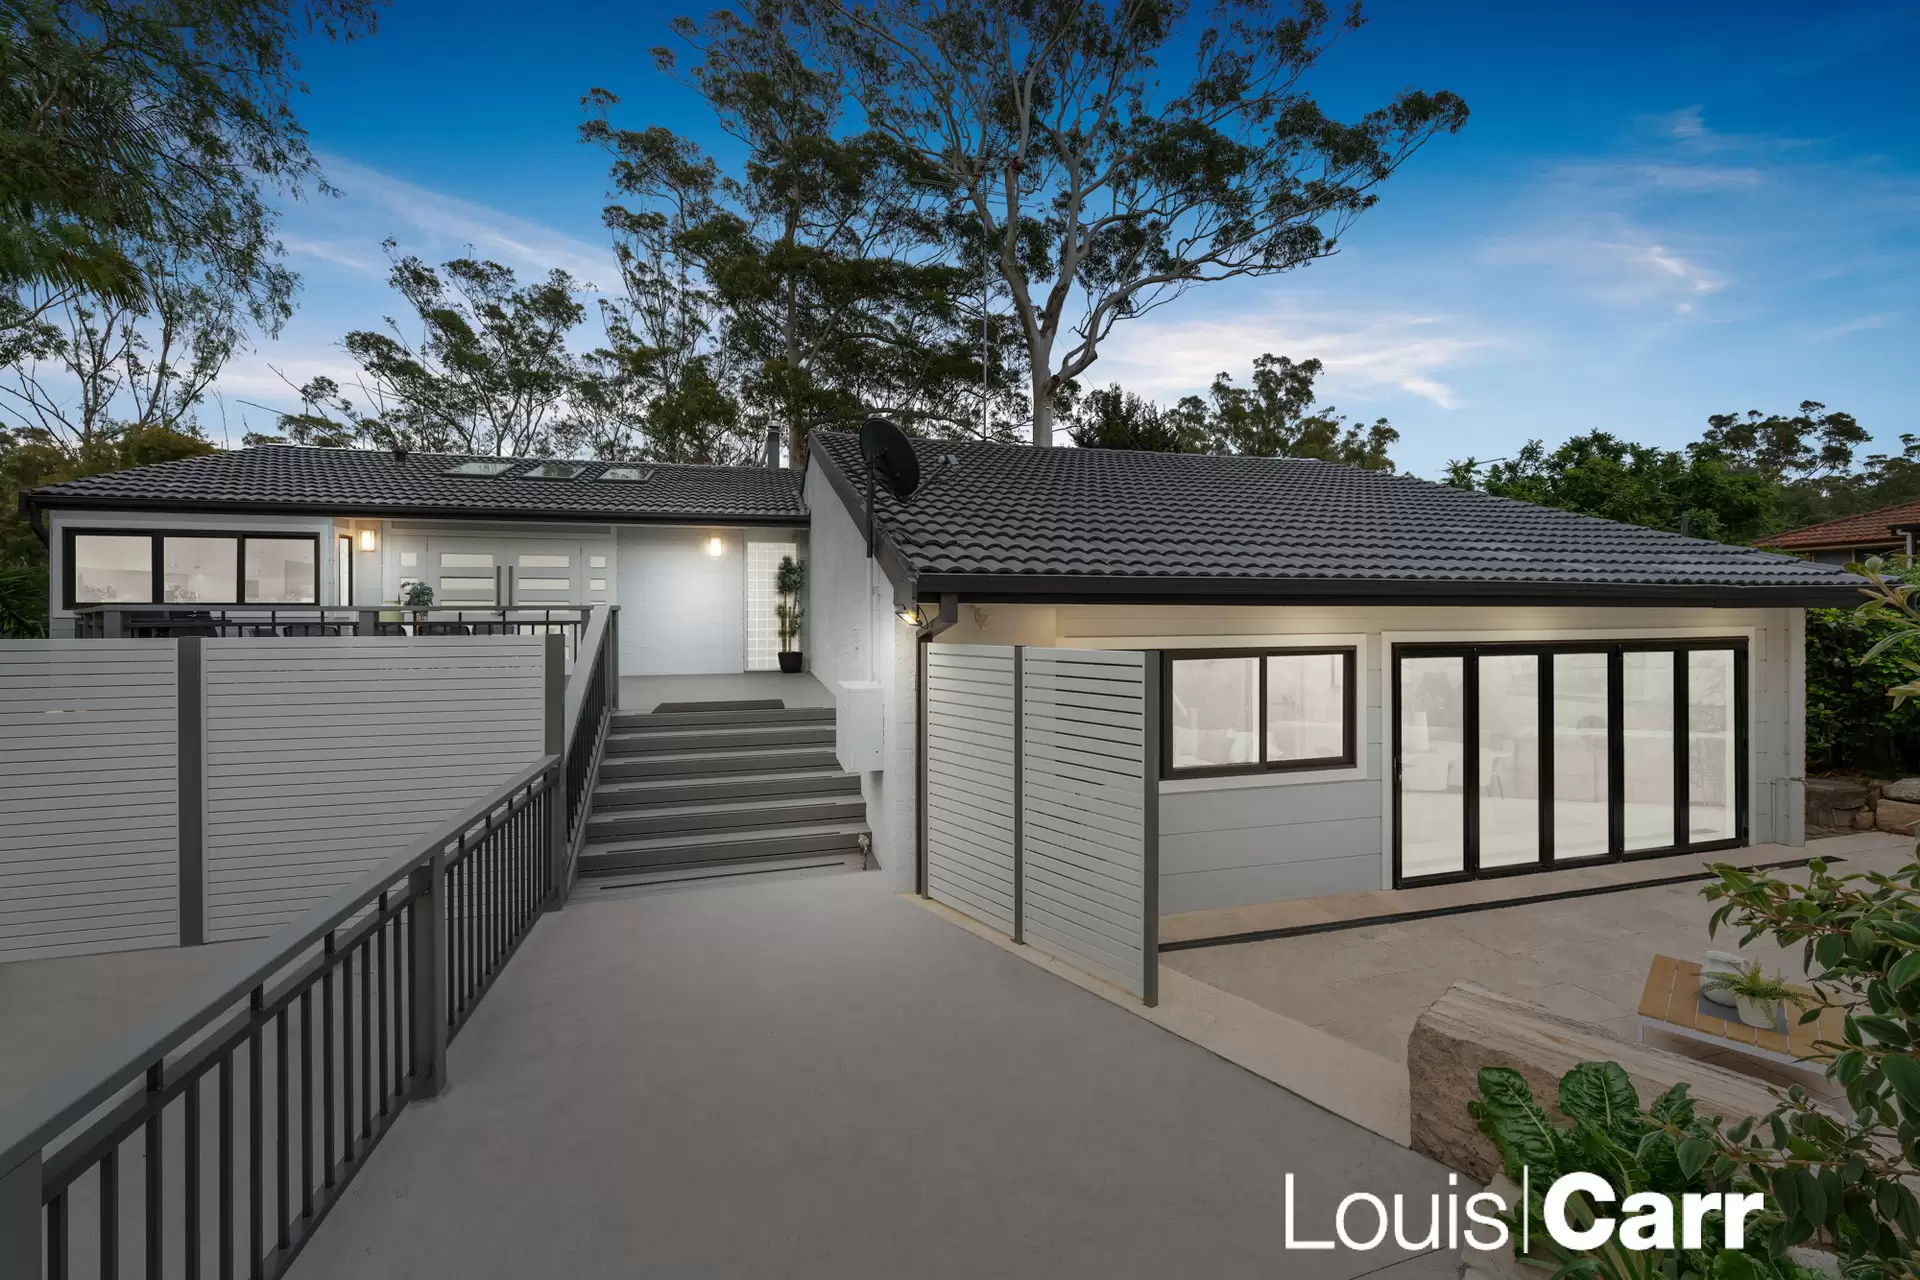 Photo #1: 13 Silky Oak Place, Castle Hill - Sold by Louis Carr Real Estate